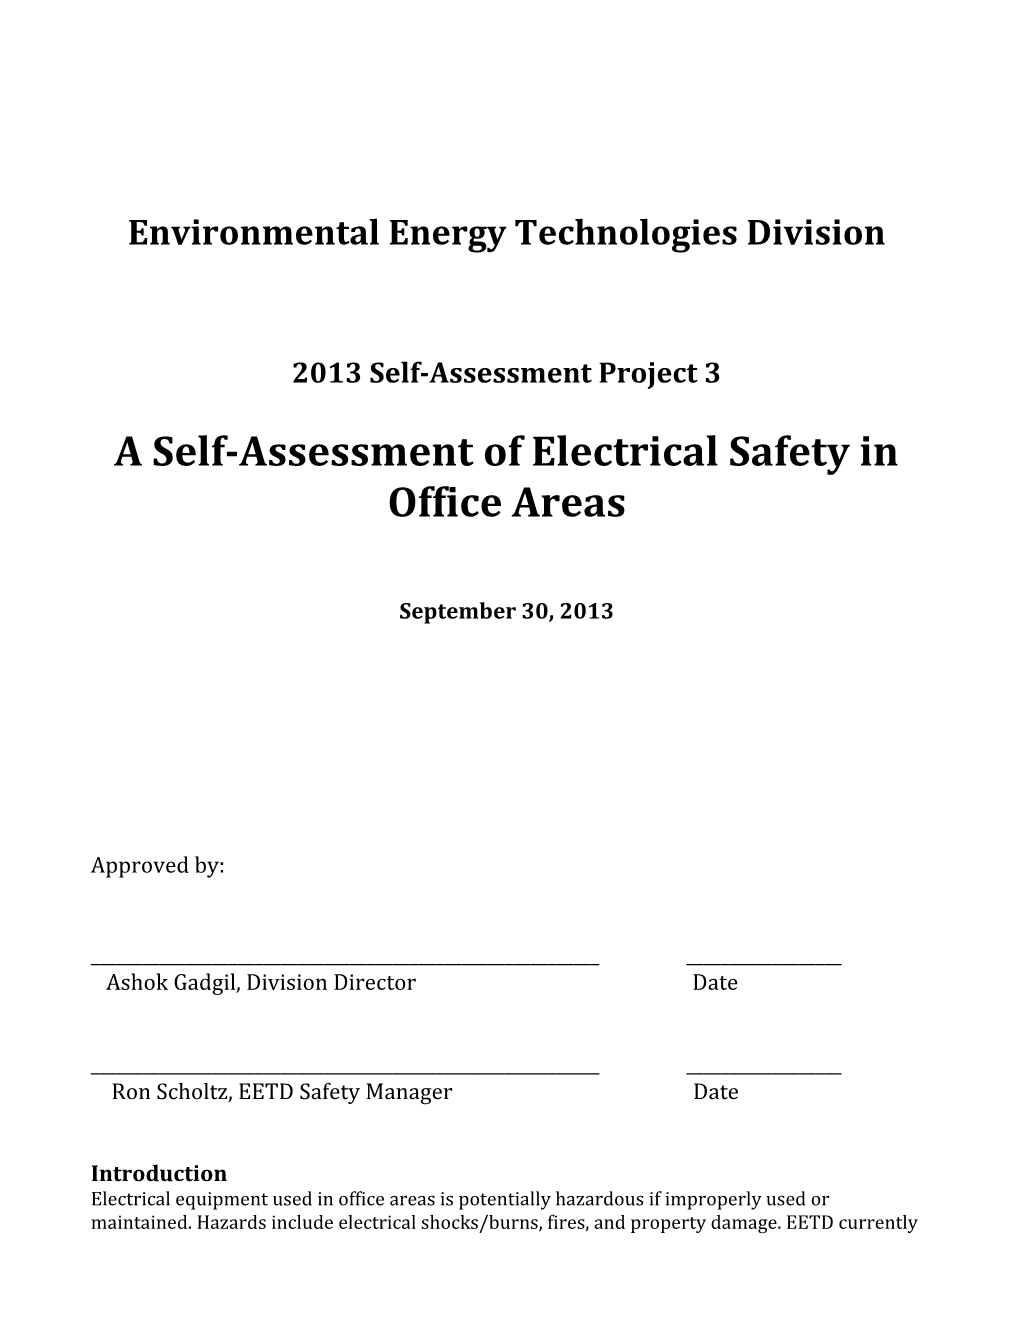 Environmental Energy Technologies Division Office Electrical Safety Self-Assessment